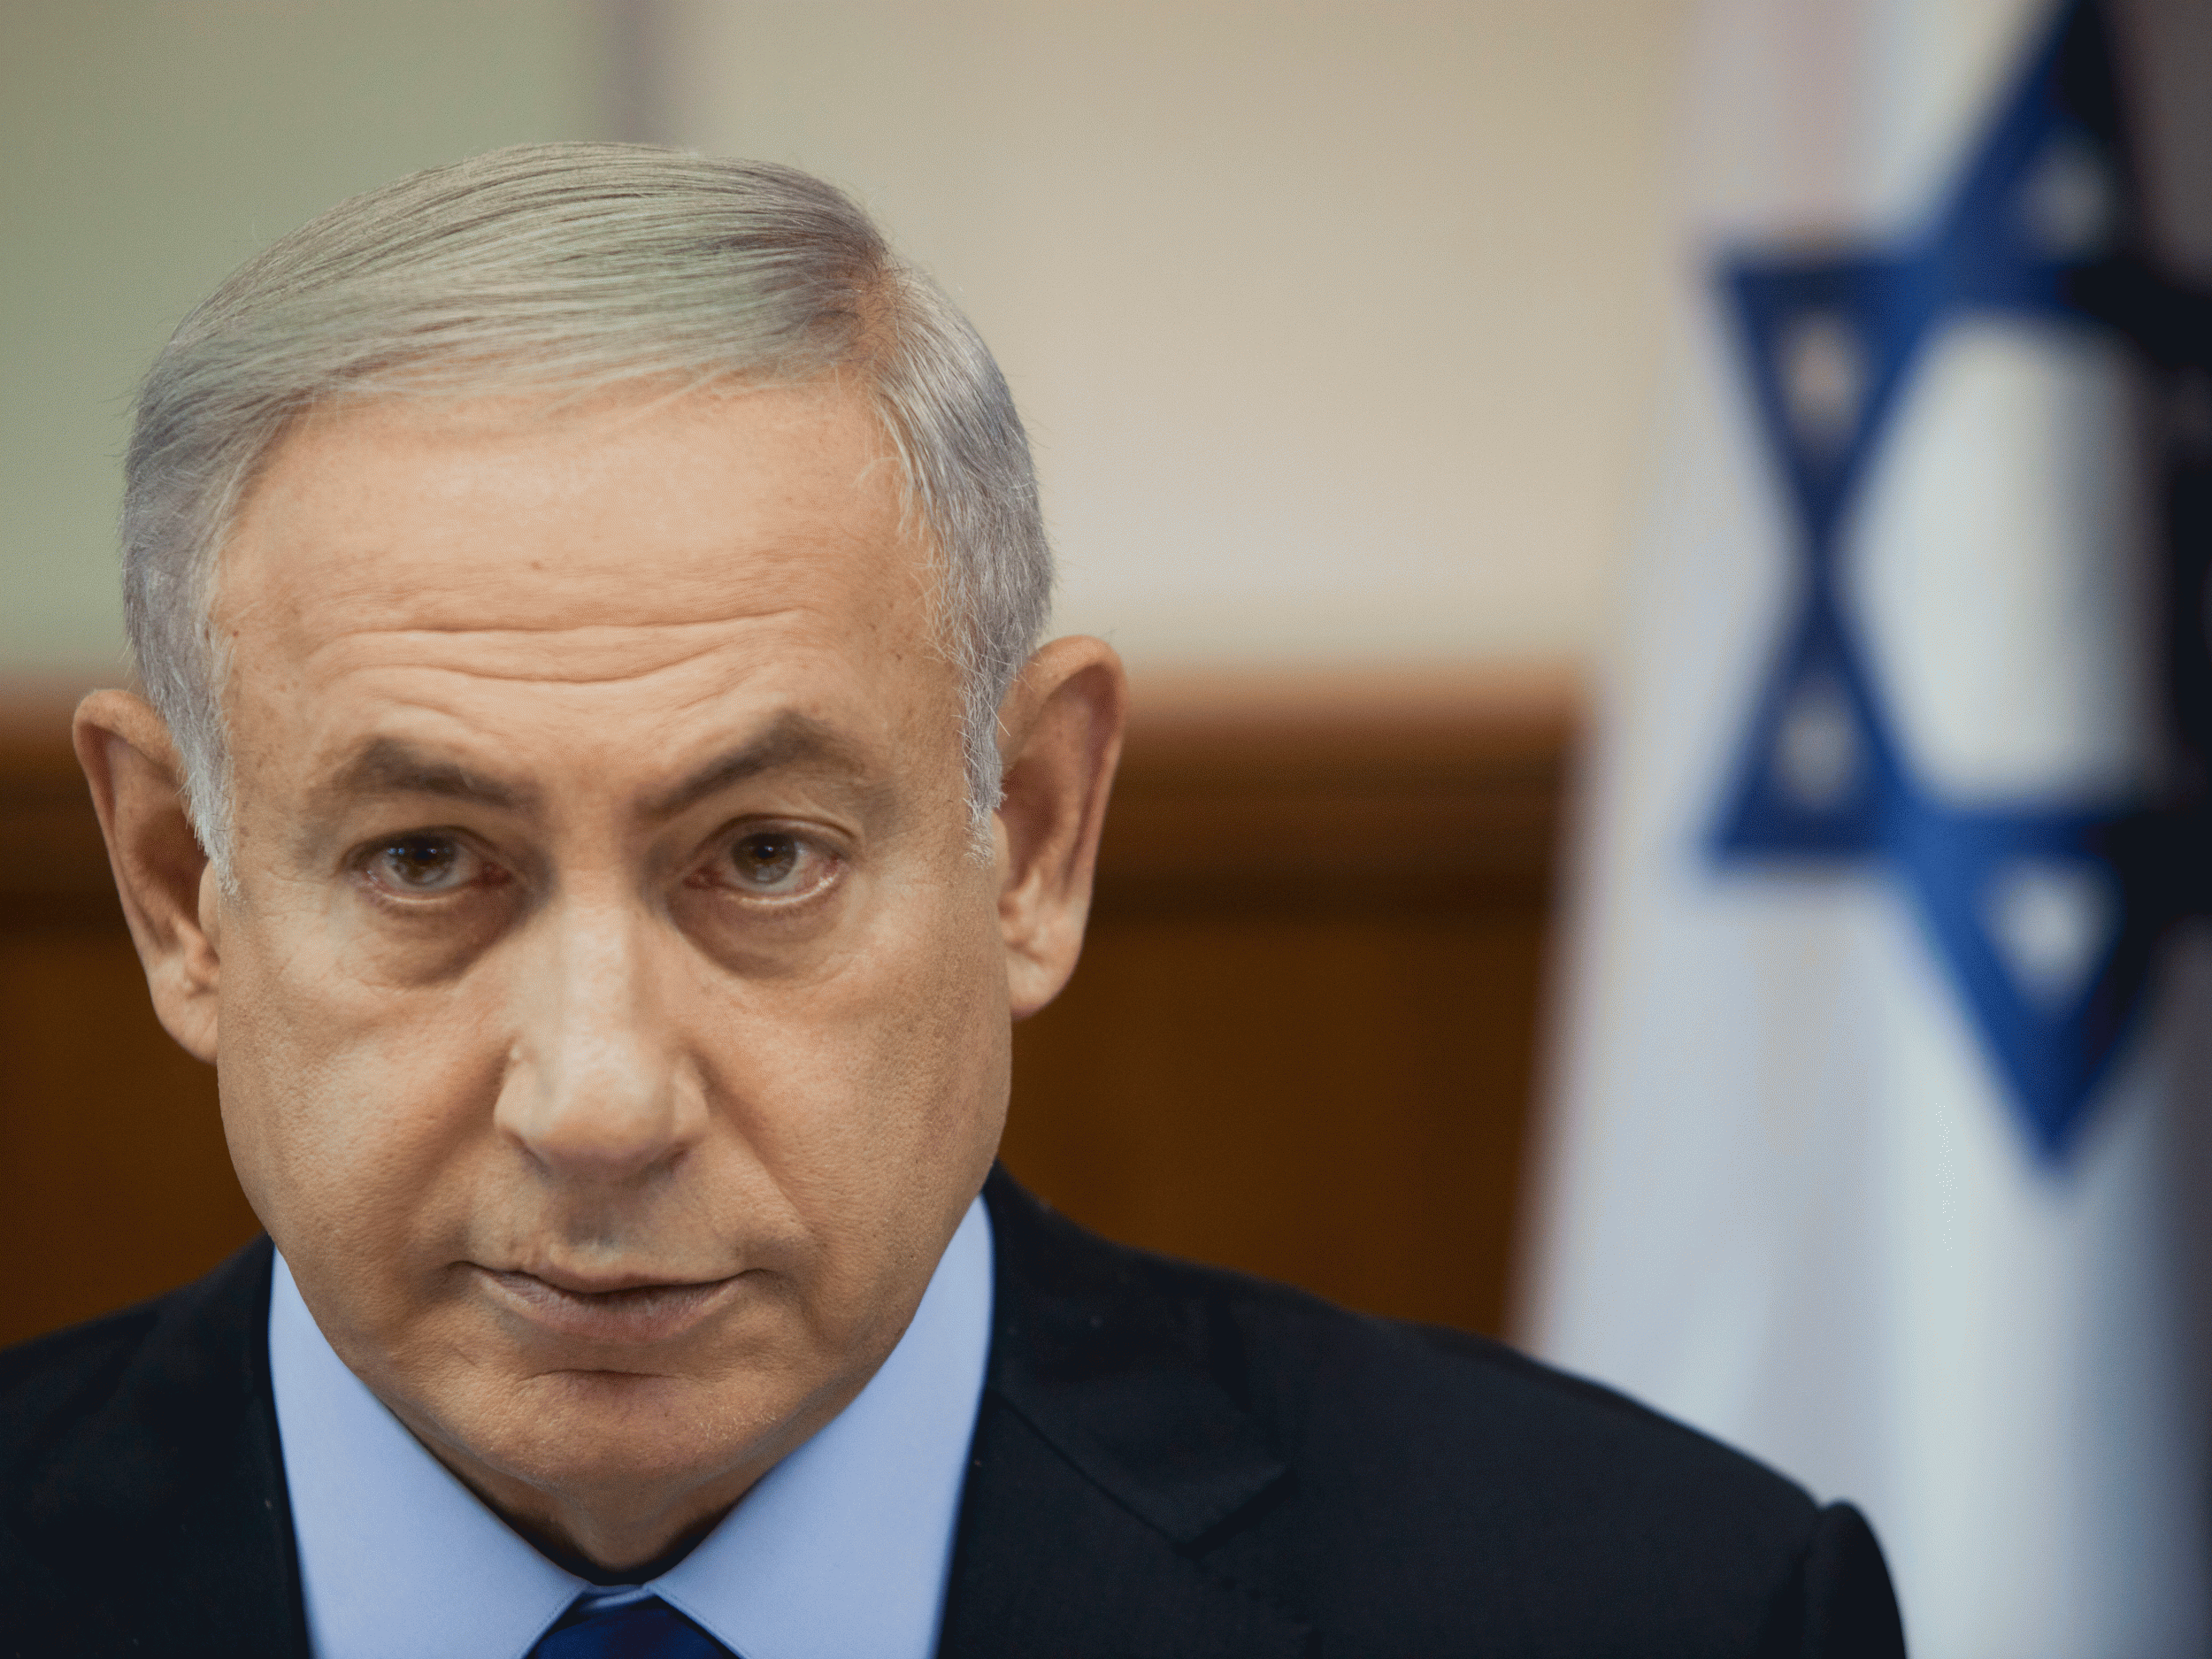 Israeli Prime Minister Benjamin Netanyahu reportedly ordered his country's Foreign Ministry to summon the Ecuadorian diplomat